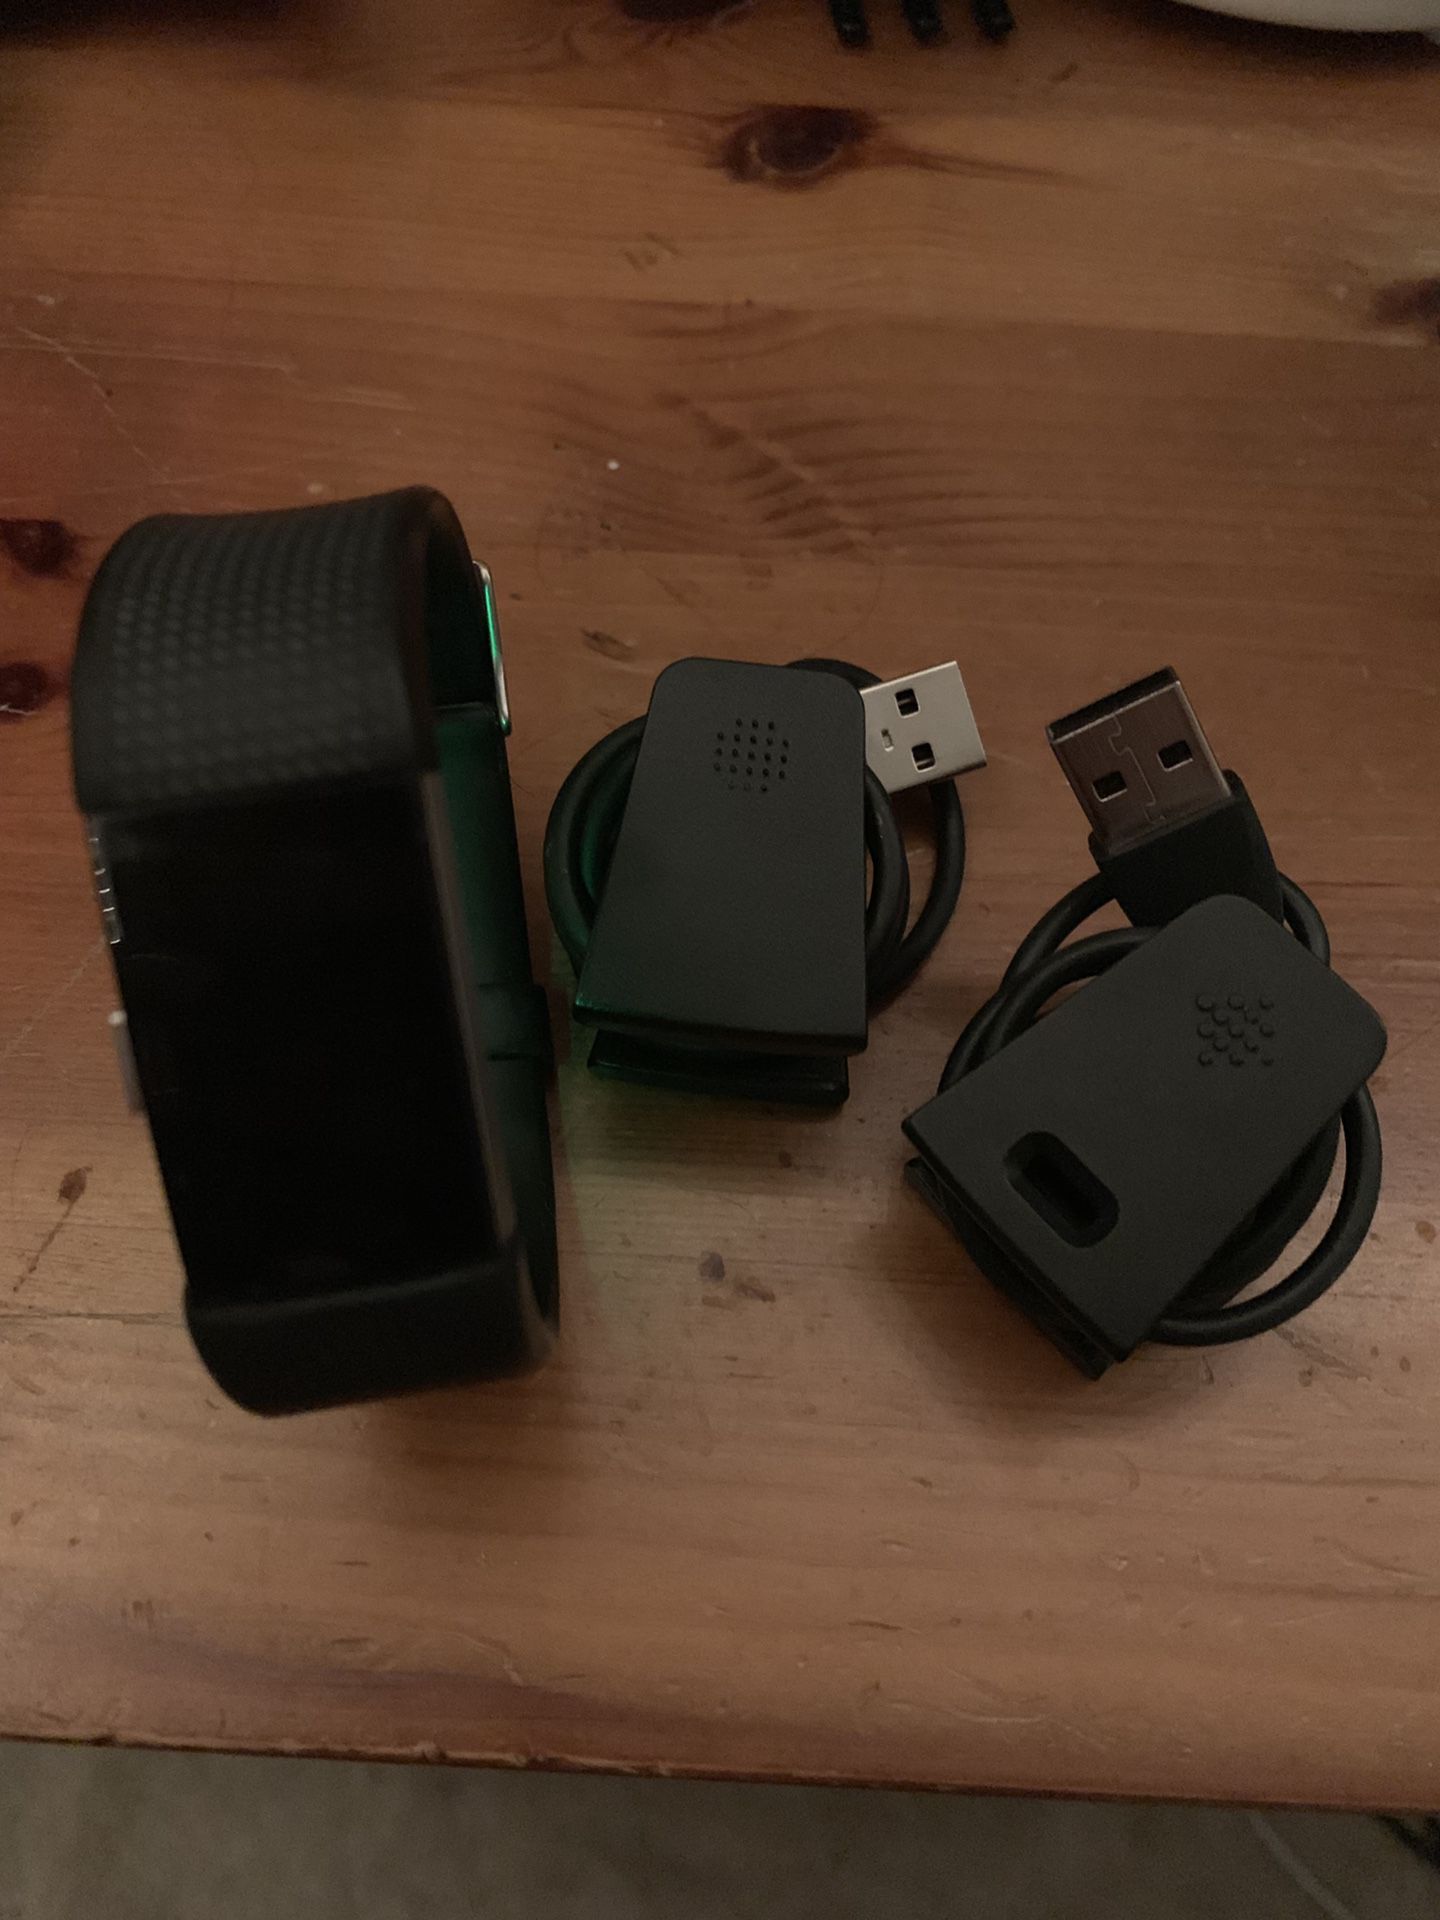 Charge 2 Fitbit + 2 chargers